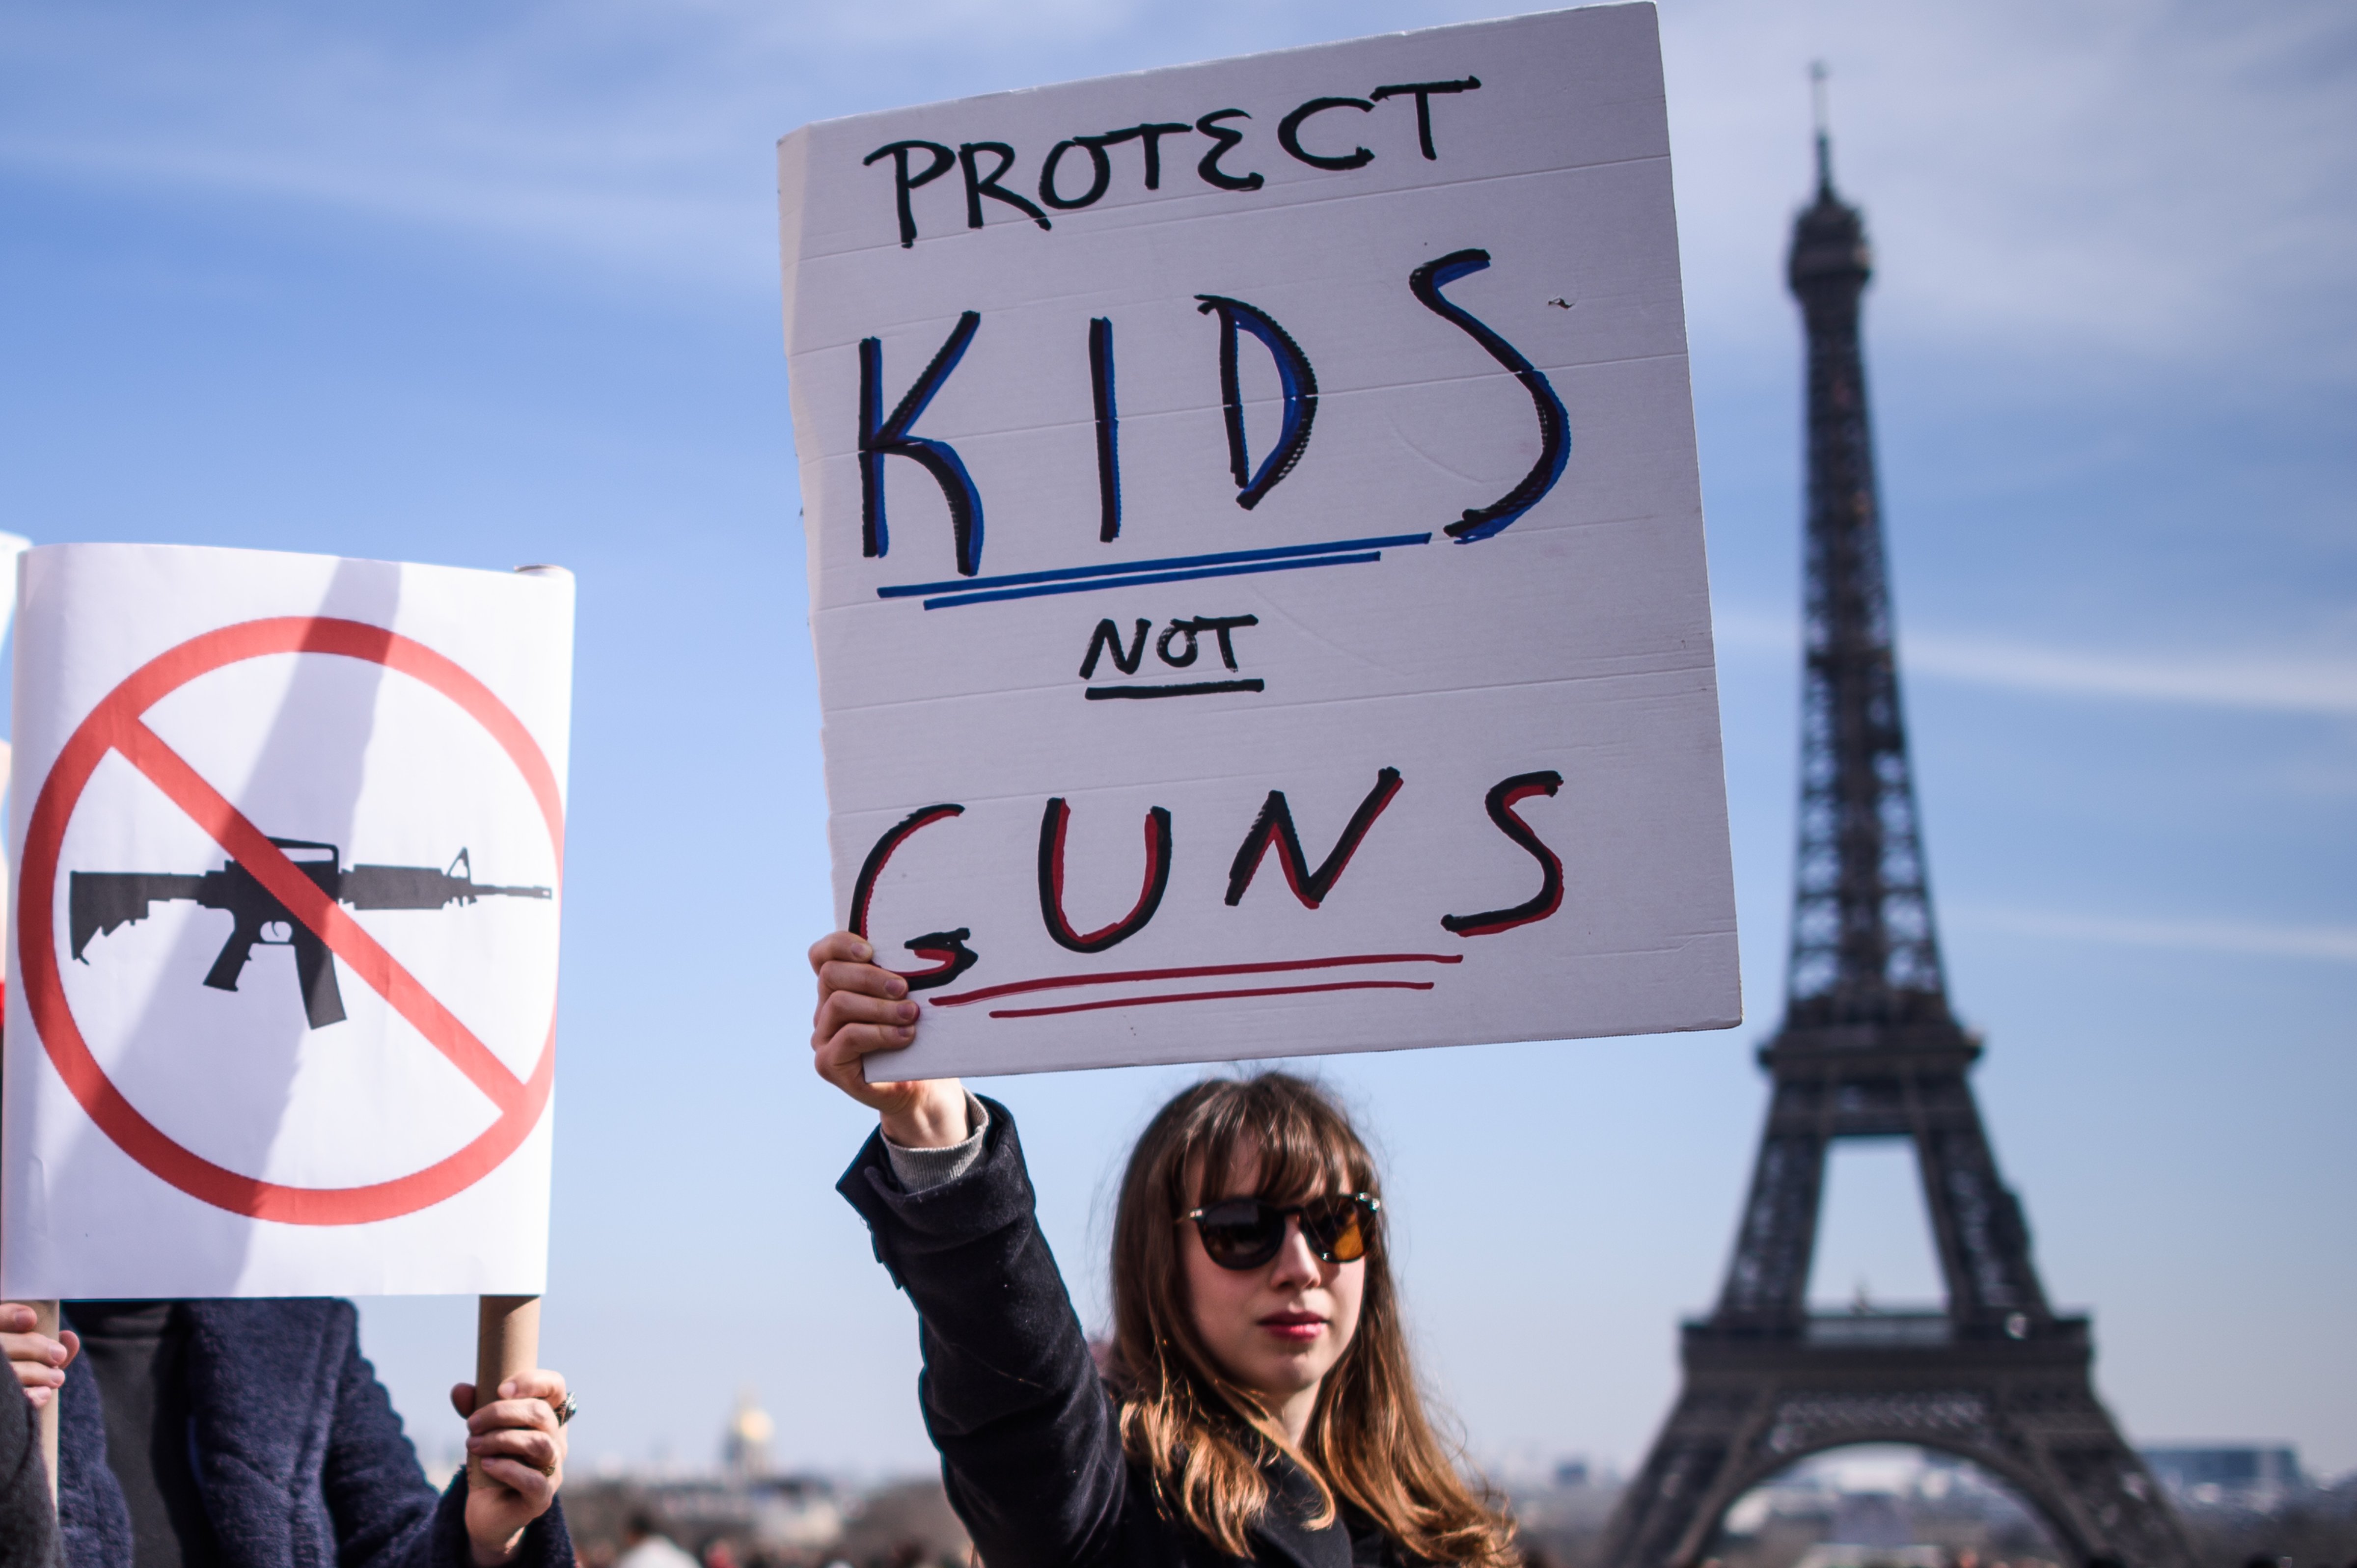 A woman holds a poster as protesters gather near the Eiffel Tower in support of the 'March For Our Lives' movement in Paris, France on March 24, 2018. (Christophe Petit Tesson—EPA-EFE)